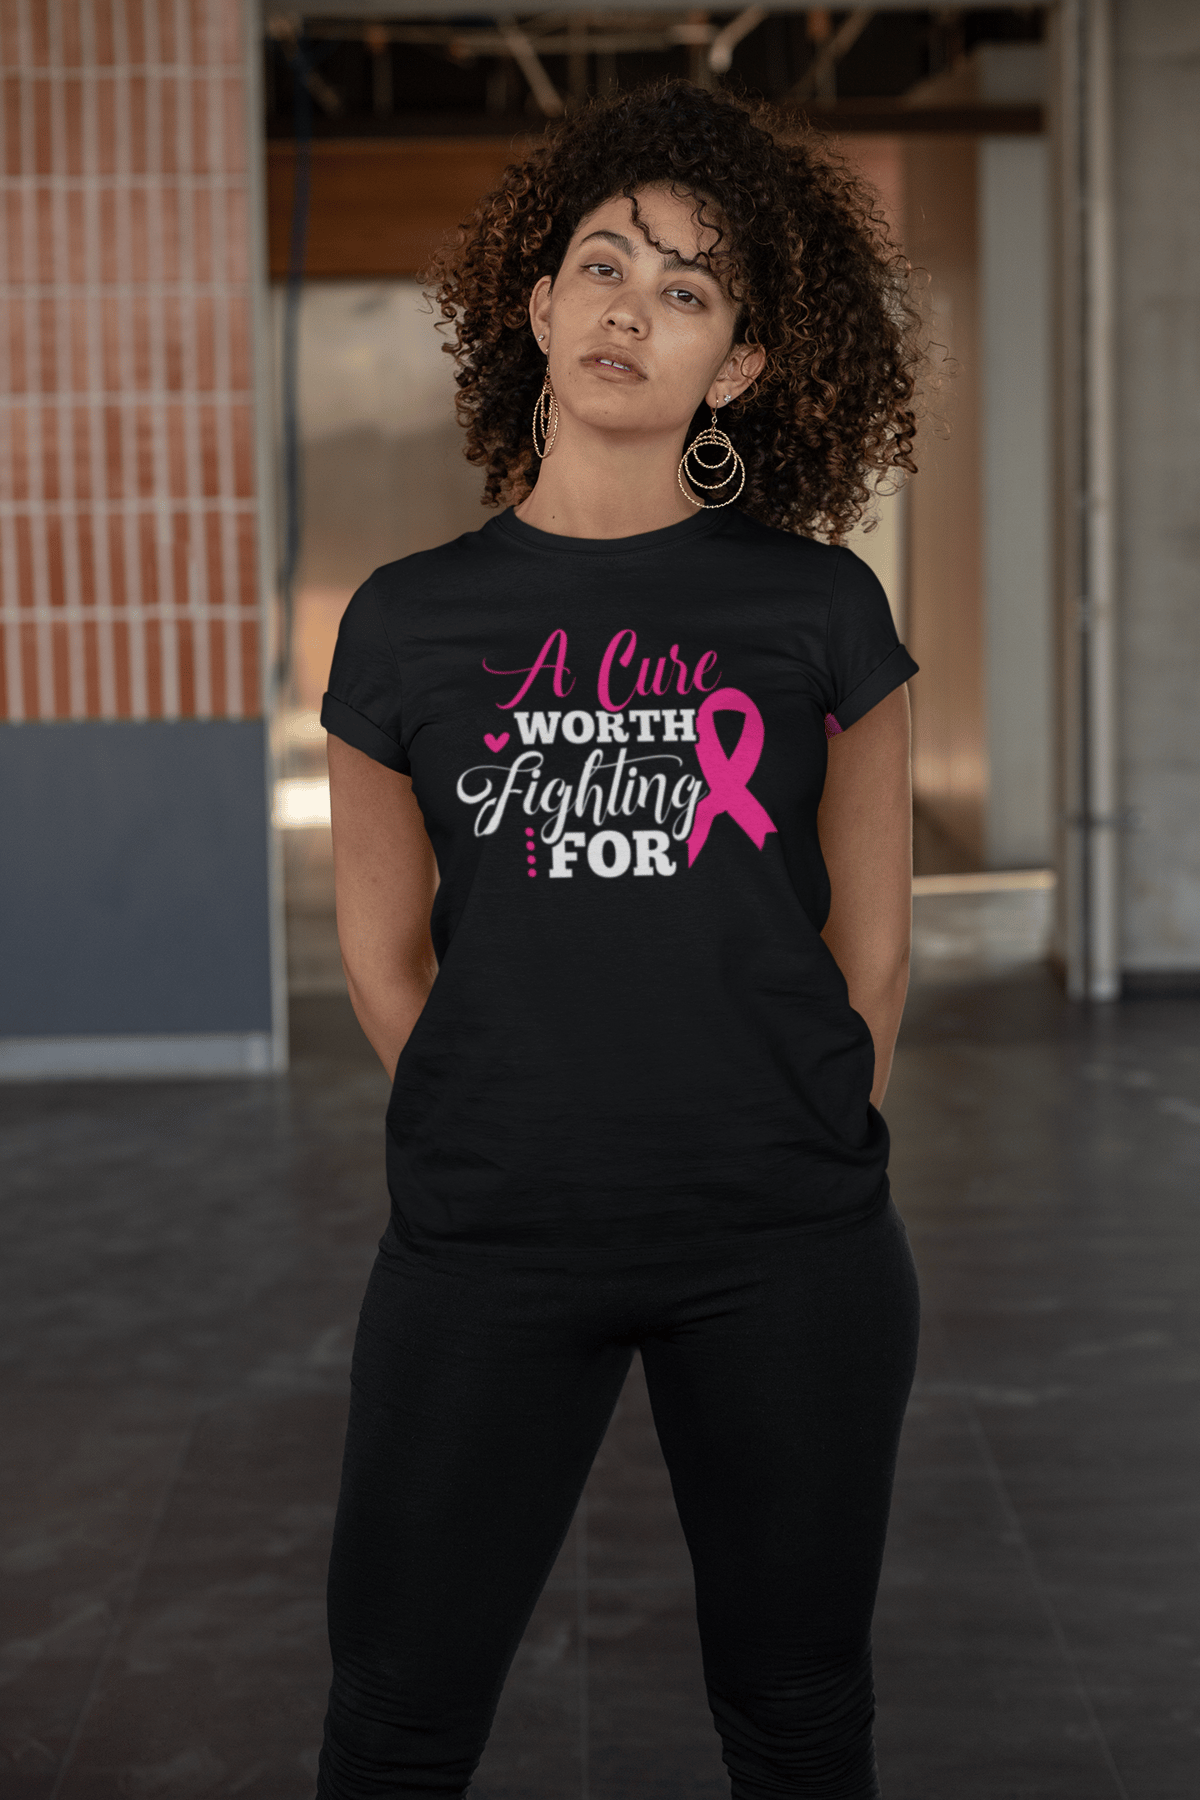 breast cancer awareness t-shirt design, the fighter girl breast